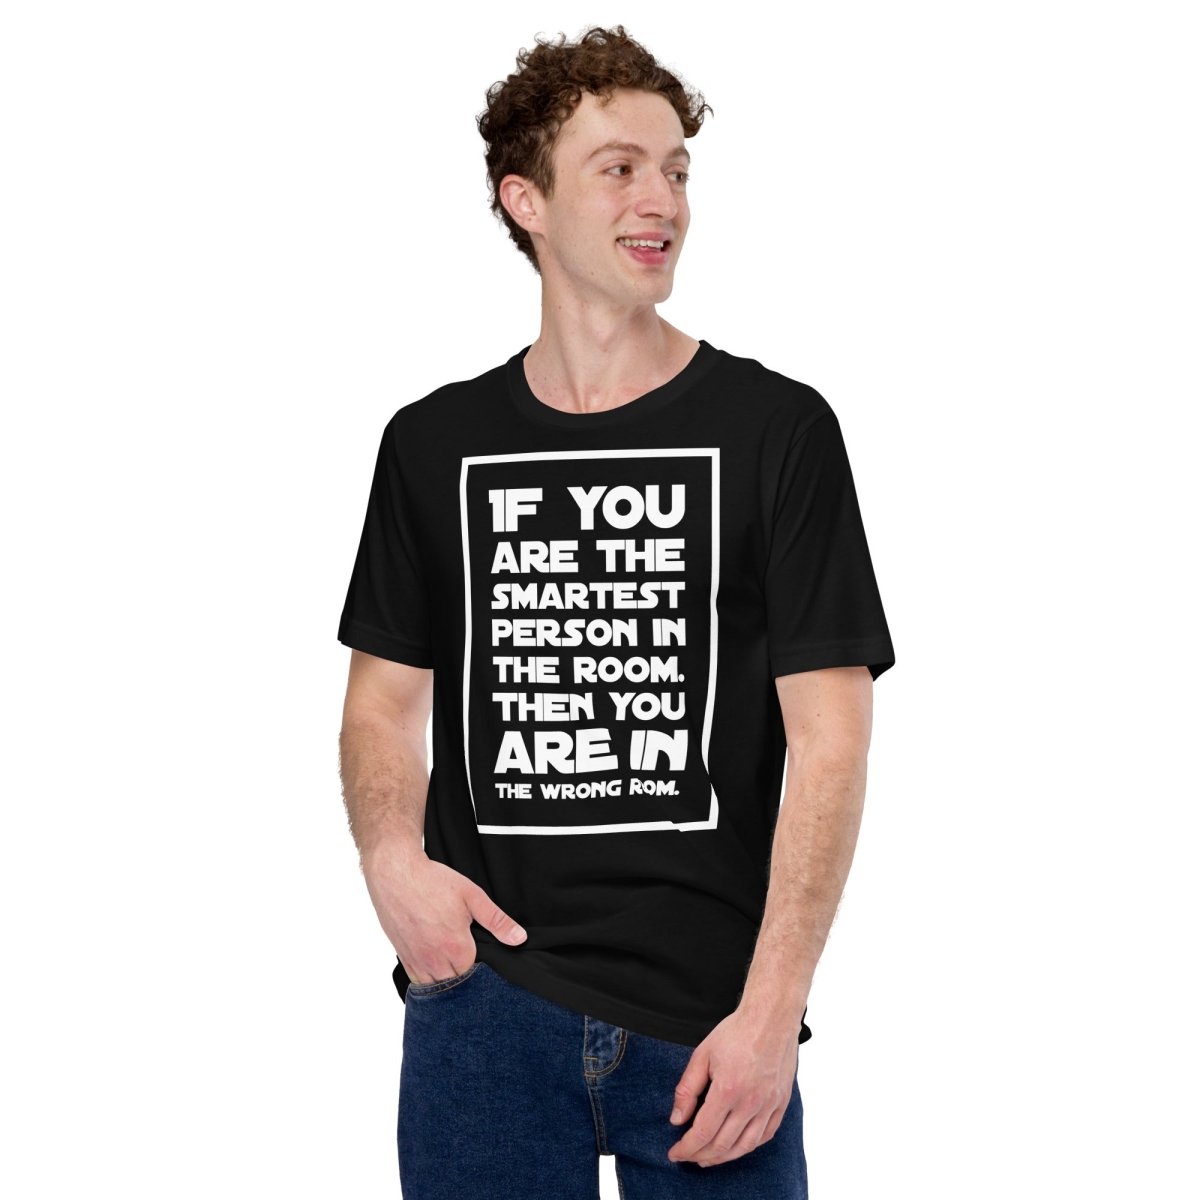 You are in the wrong room. T - Shirt (unisex) - Black - AI Store